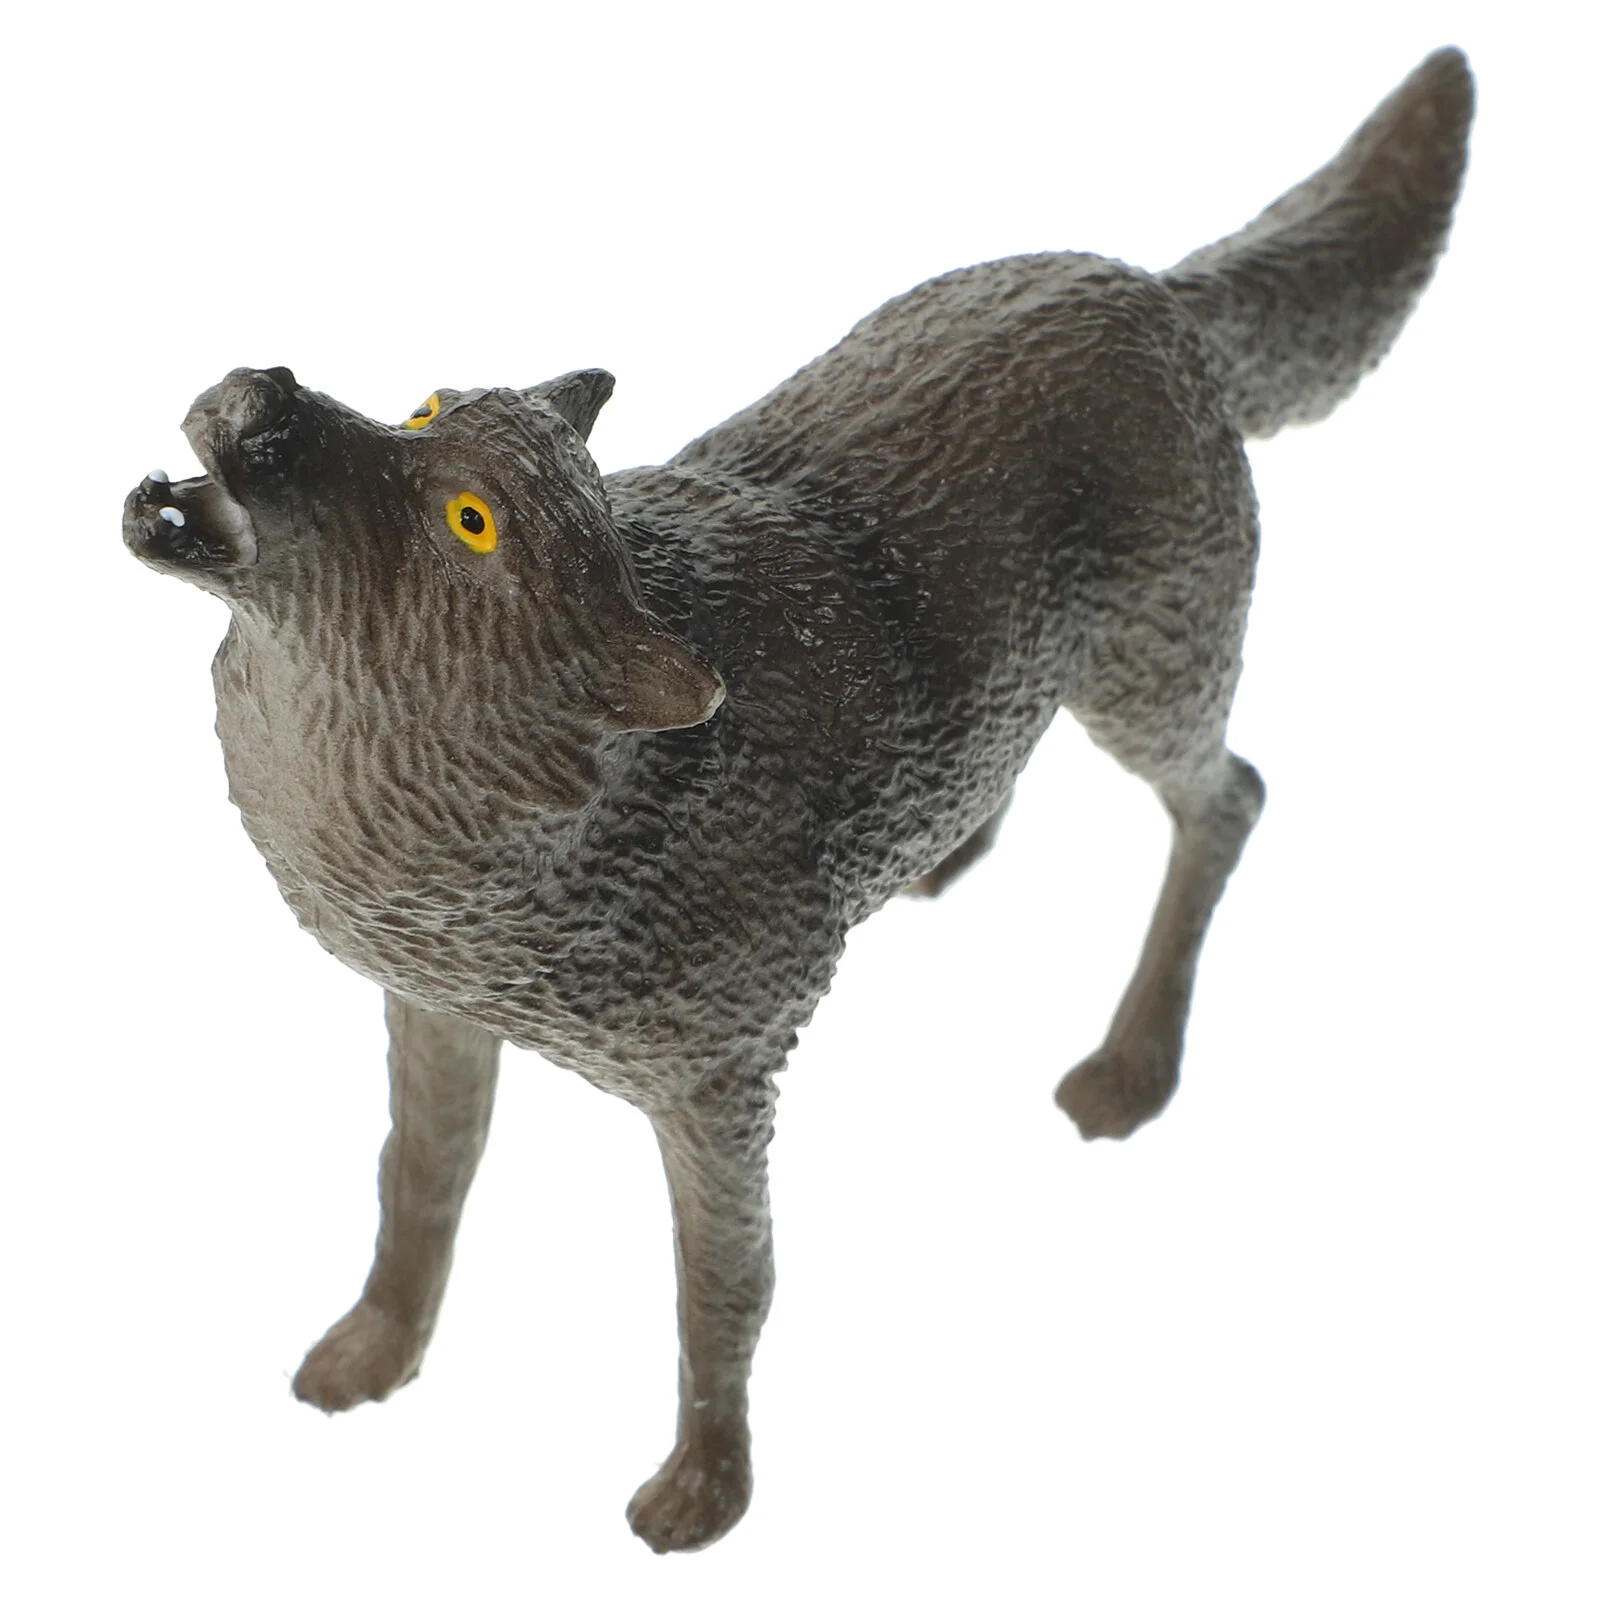 

Wolf Model Toy Wildlife Animal Models Ornament Kids Cognitive Animals Figurines Decorations Home Figures Micro Set